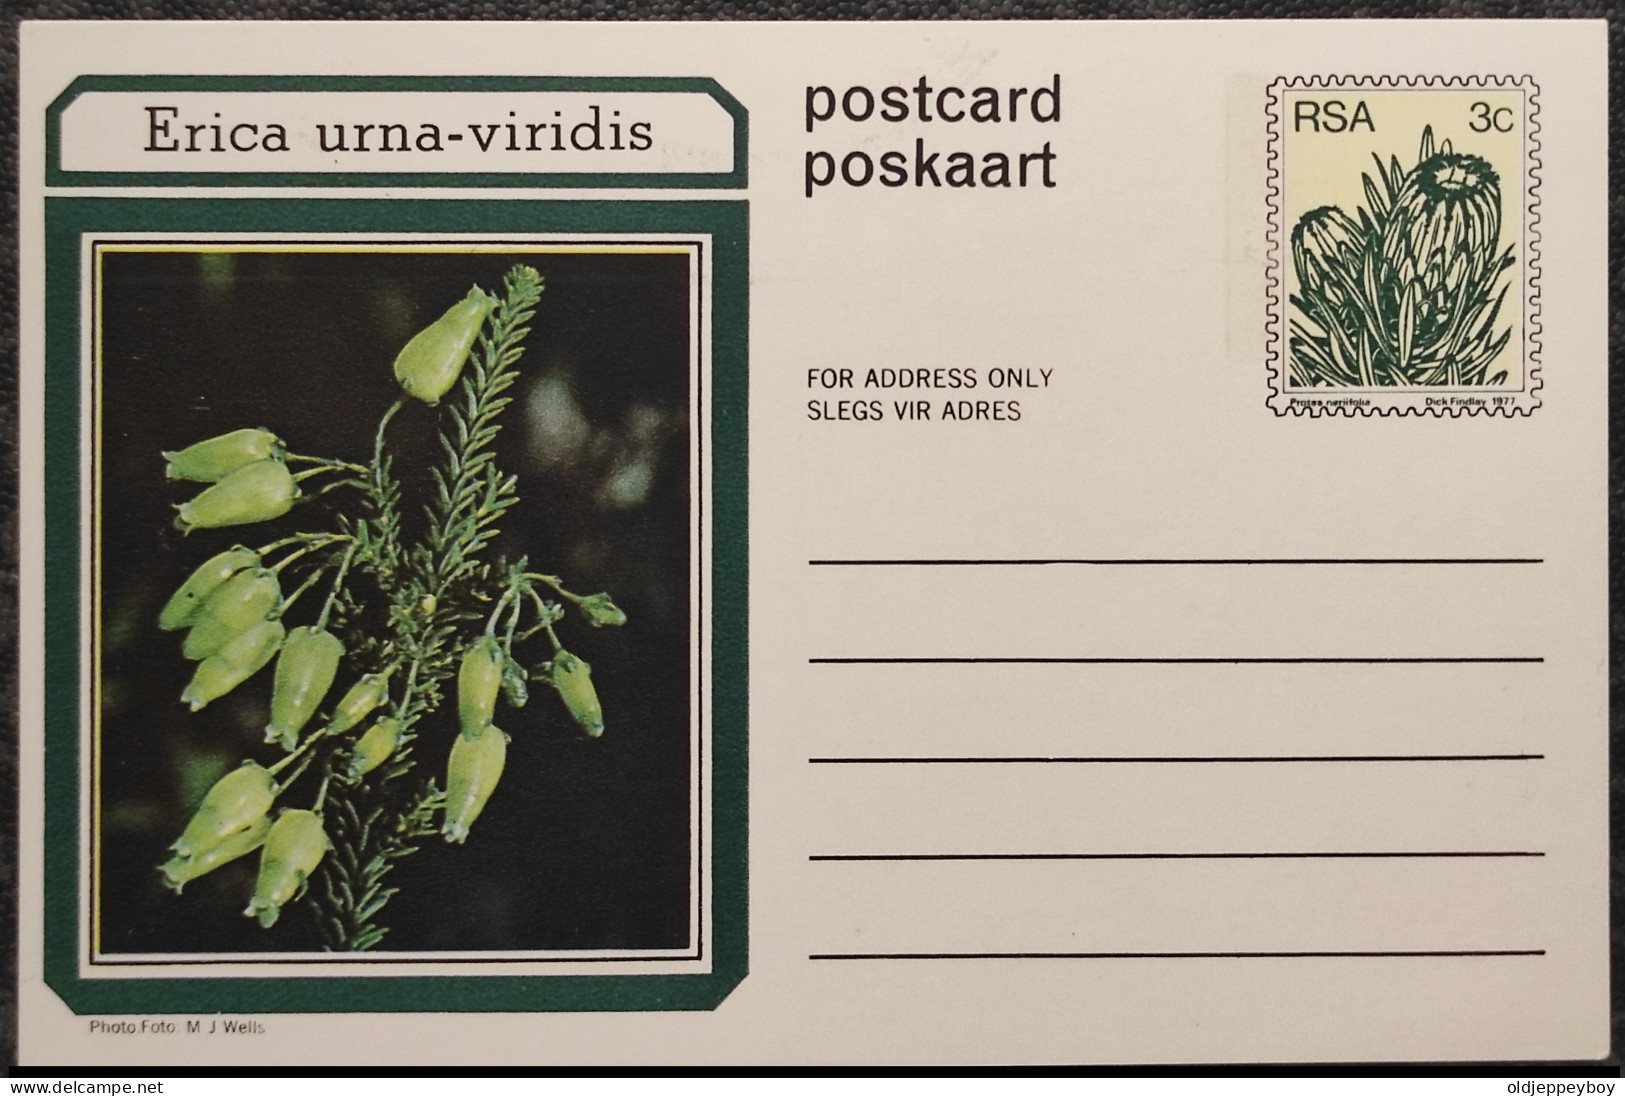 8c SOUTH AFRICA Postal STATIONERY CARD Illus ERICA URNA VIRIDIS FLOWER Cover Stamps Flowers Rsa - Covers & Documents